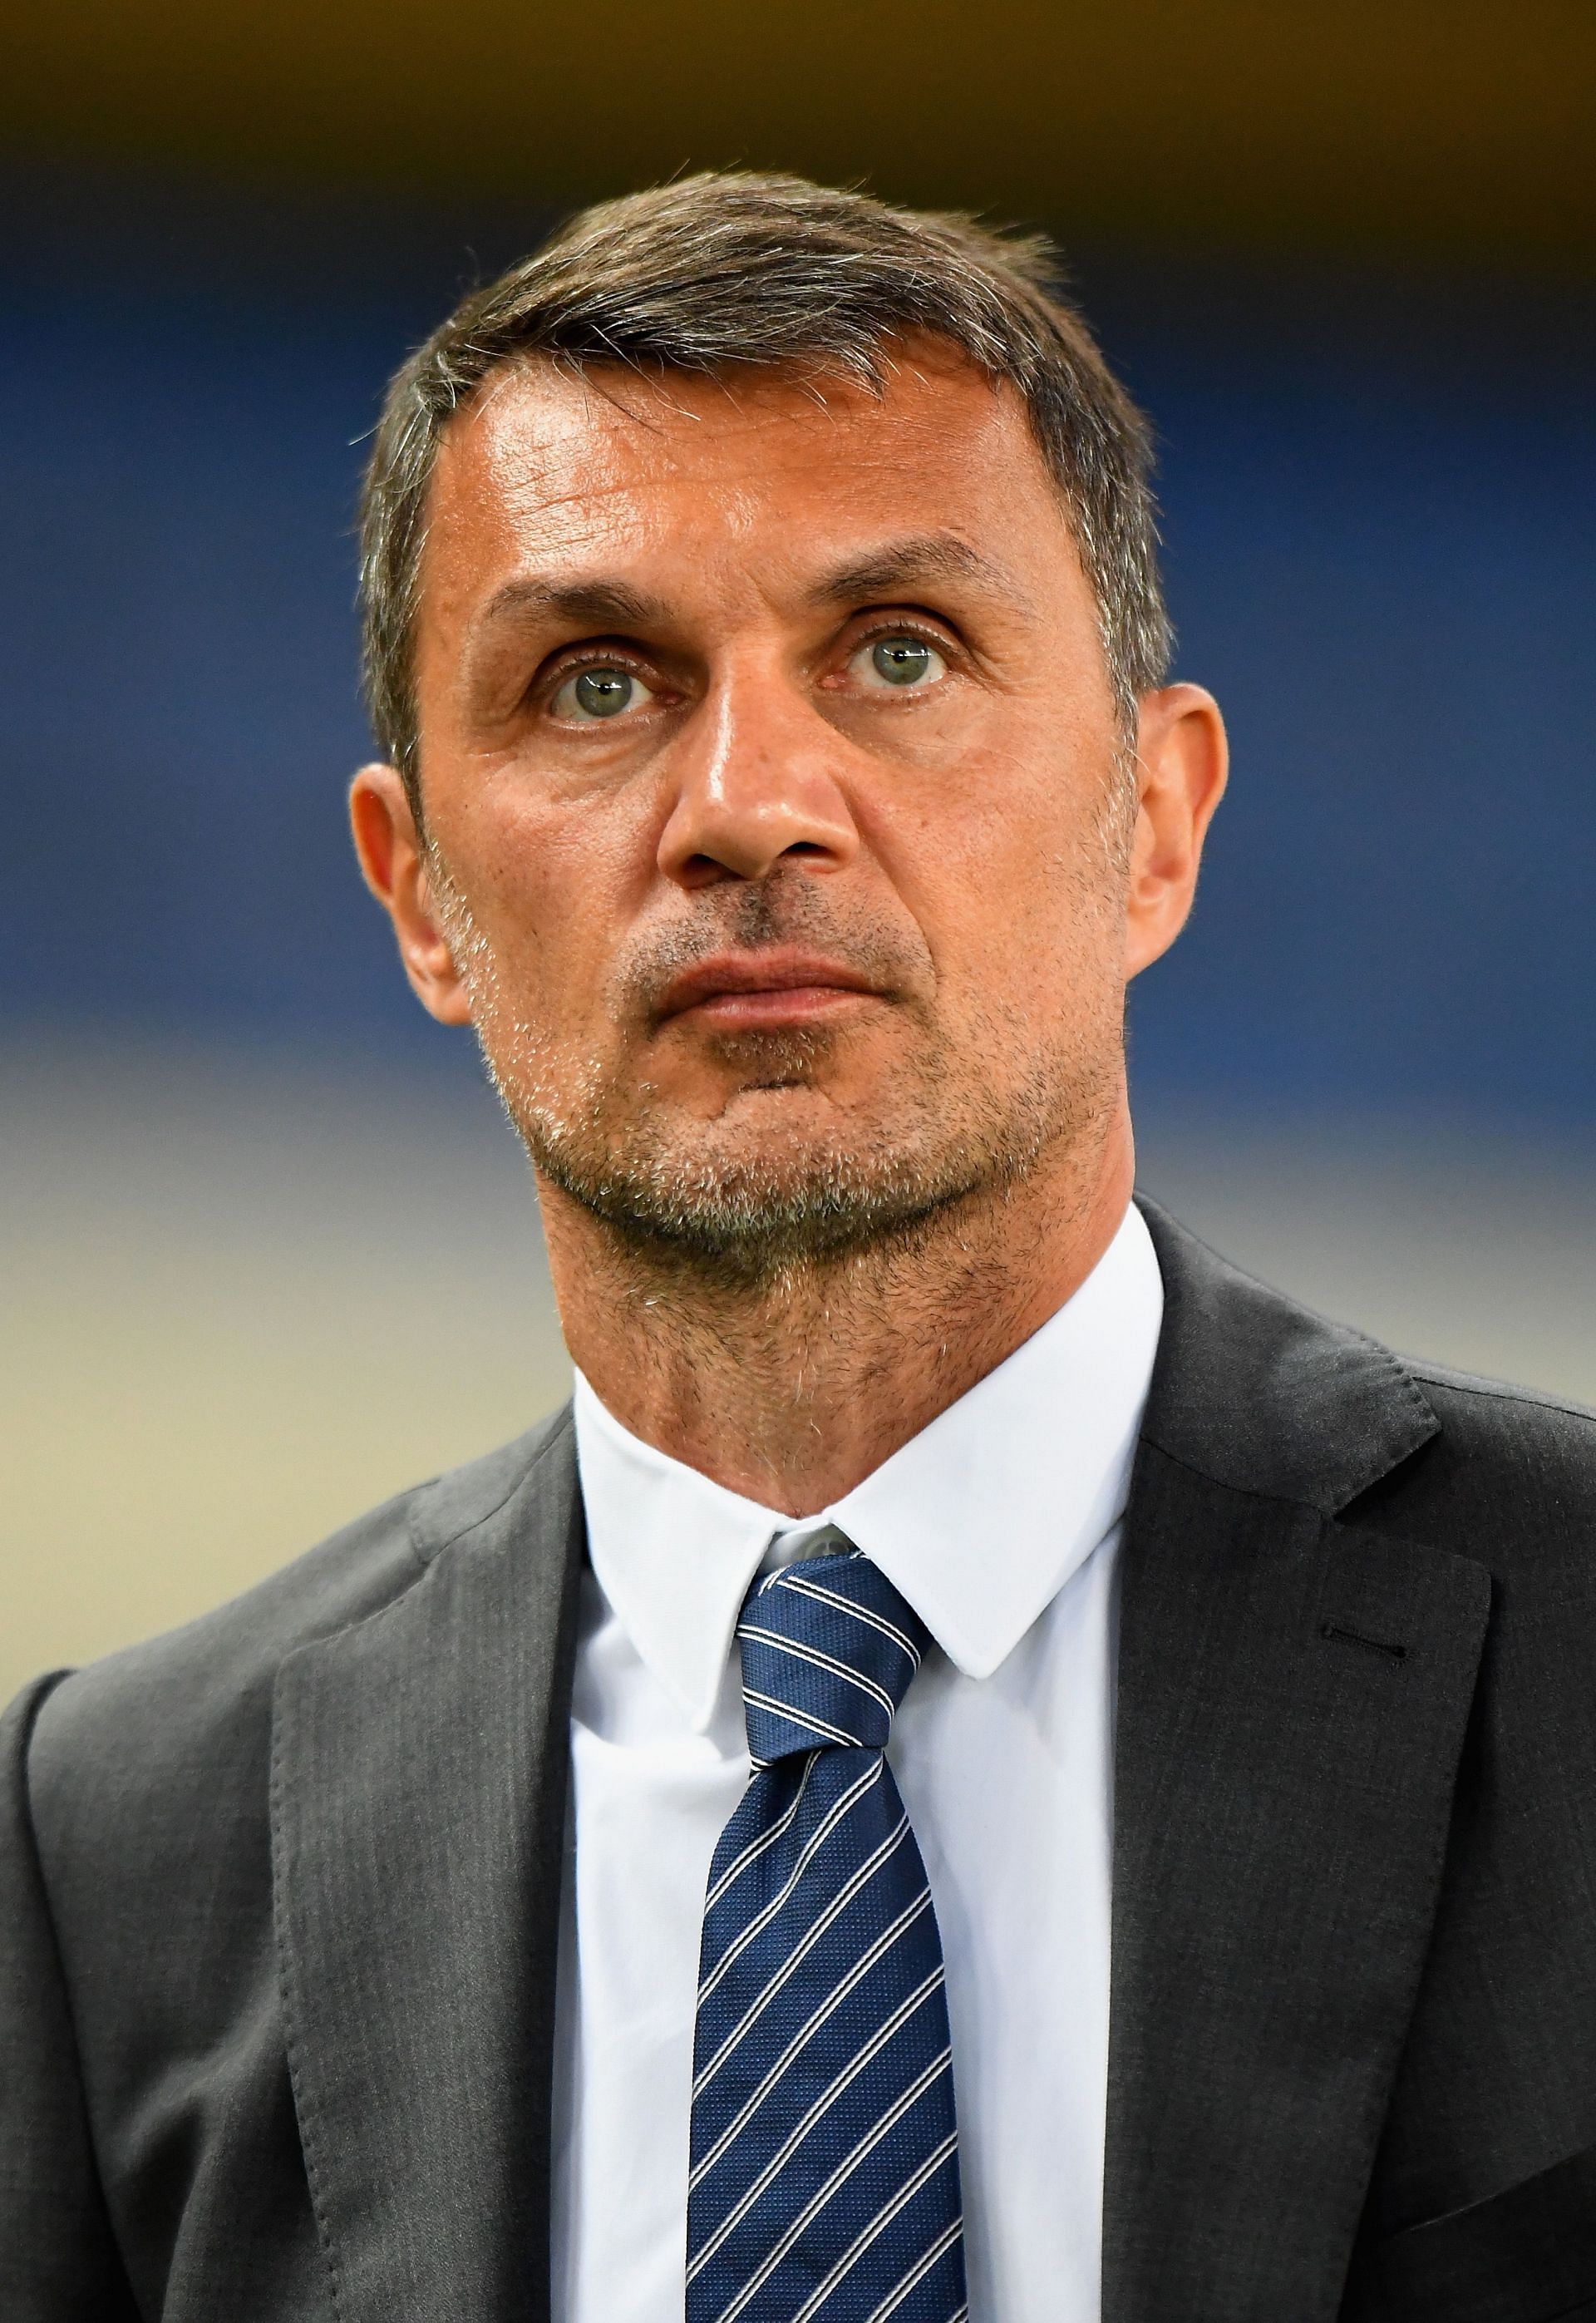 Paolo Maldini of AC Milan looks on during the Serie A match between Hellas Verona and AC Milan at Stadio Marcantonio Bentegodi on September 15, 2019 in Verona, Italy.